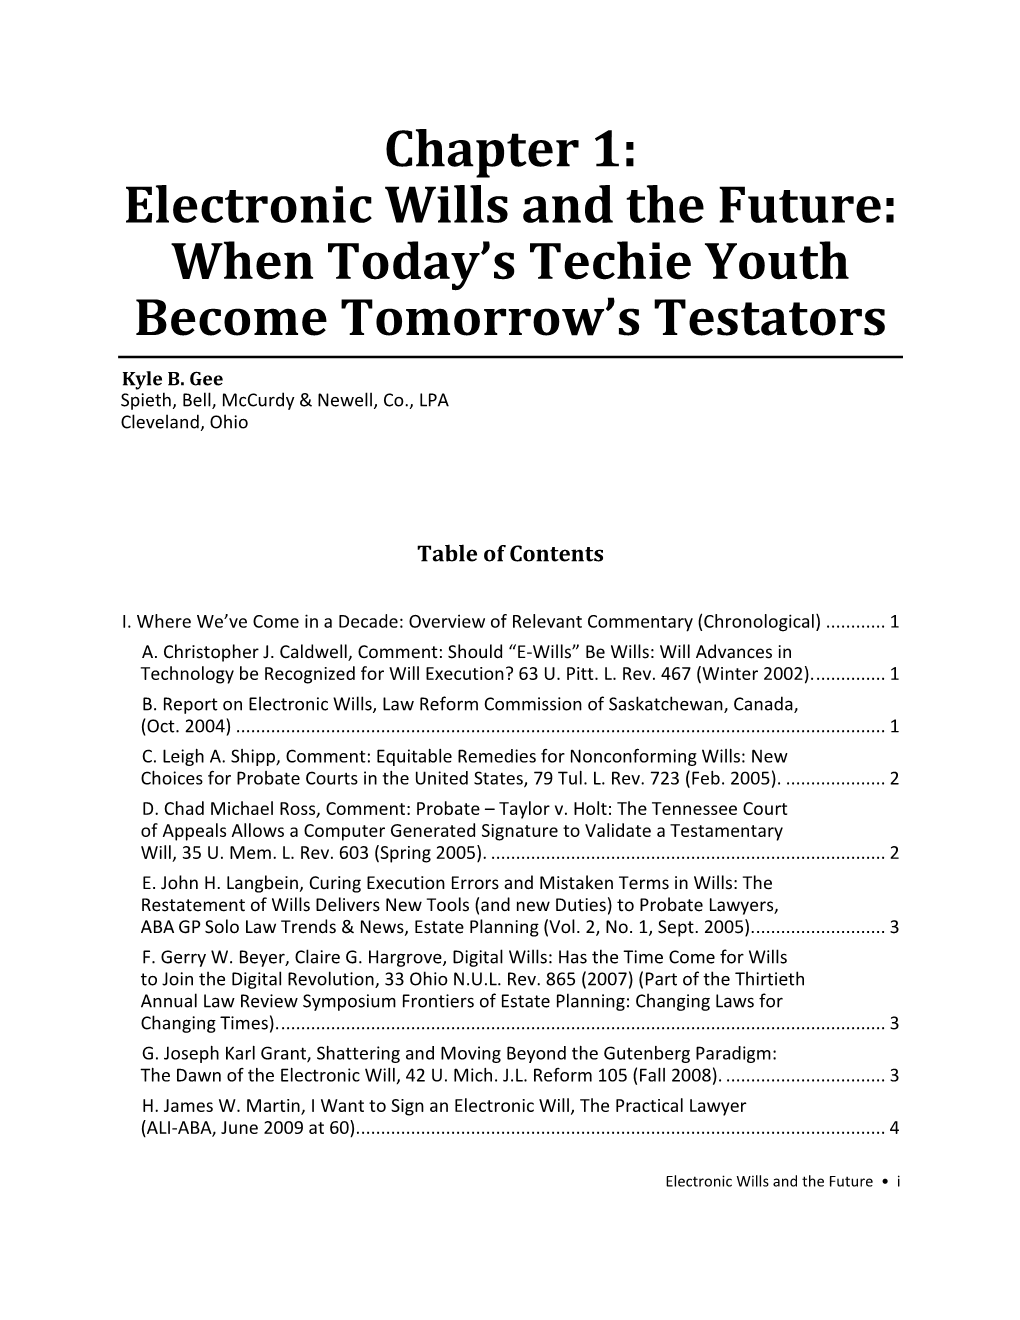 Chapter 1: Electronic Wills and the Future: When Today's Techie Youth